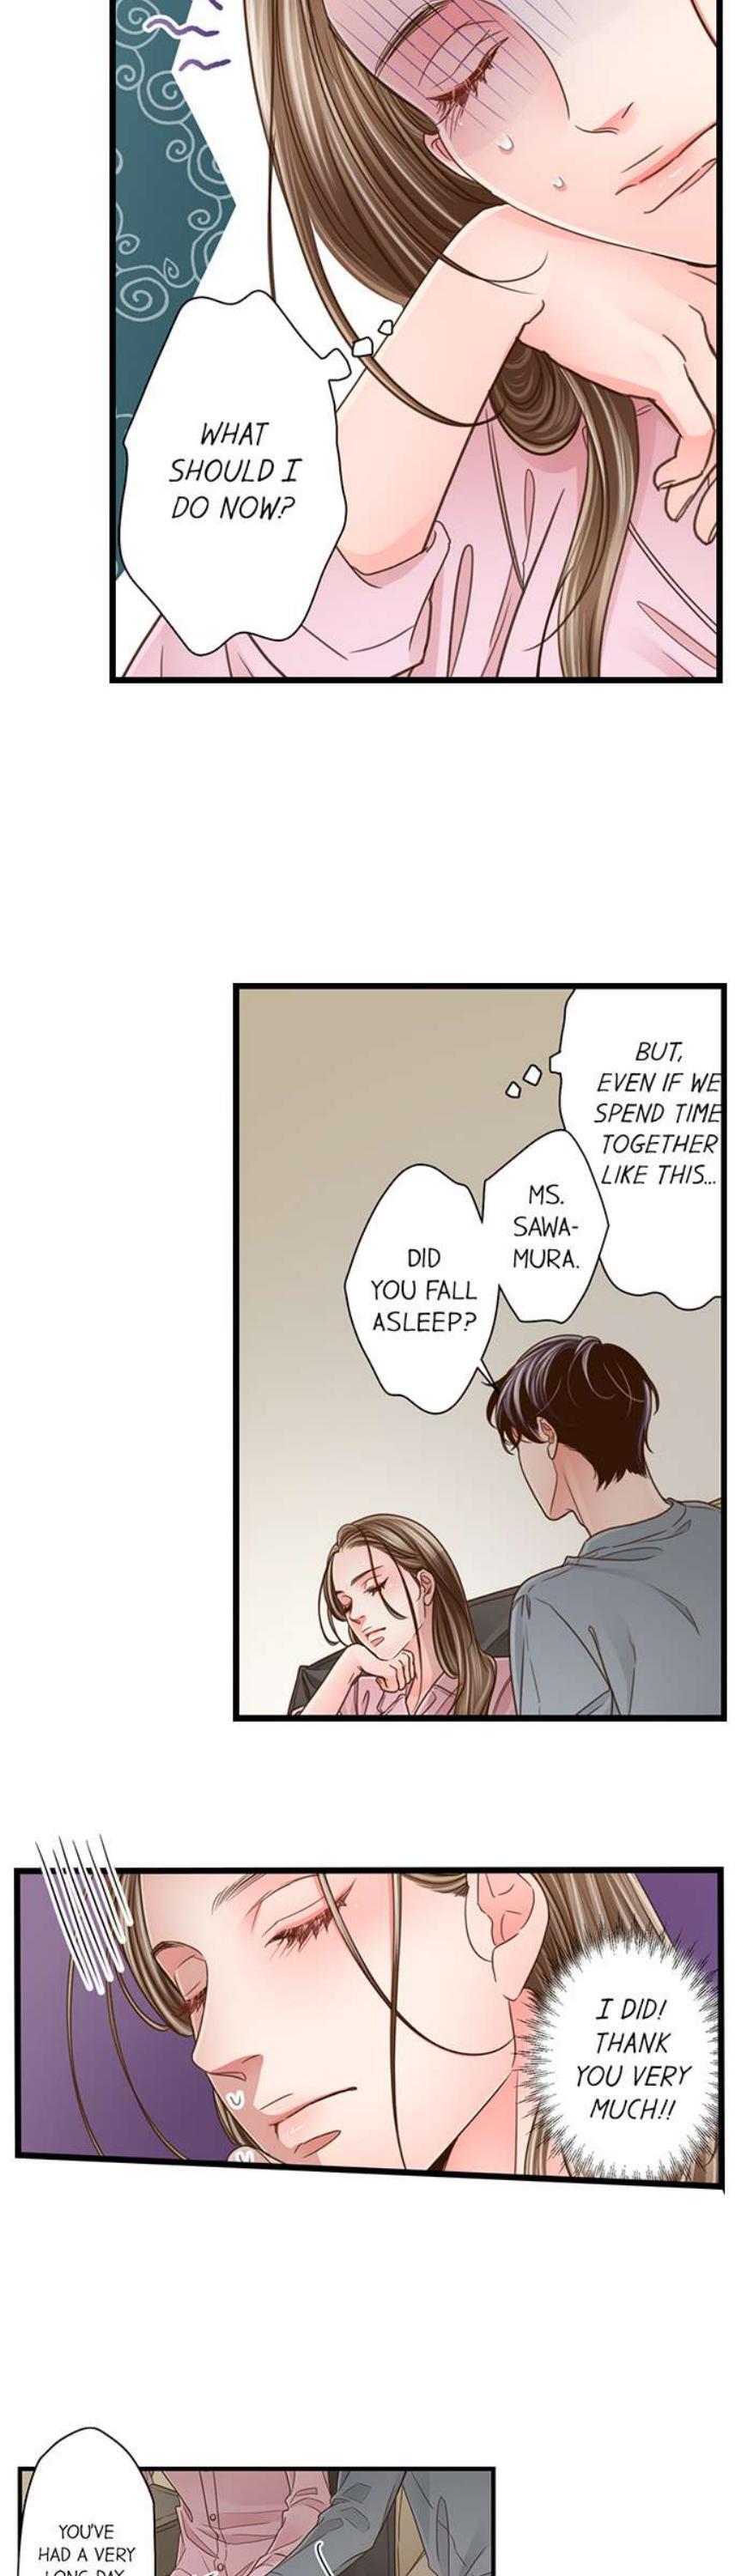 Yanagihara Is a Sex Addict - Chapter 139 Page 3